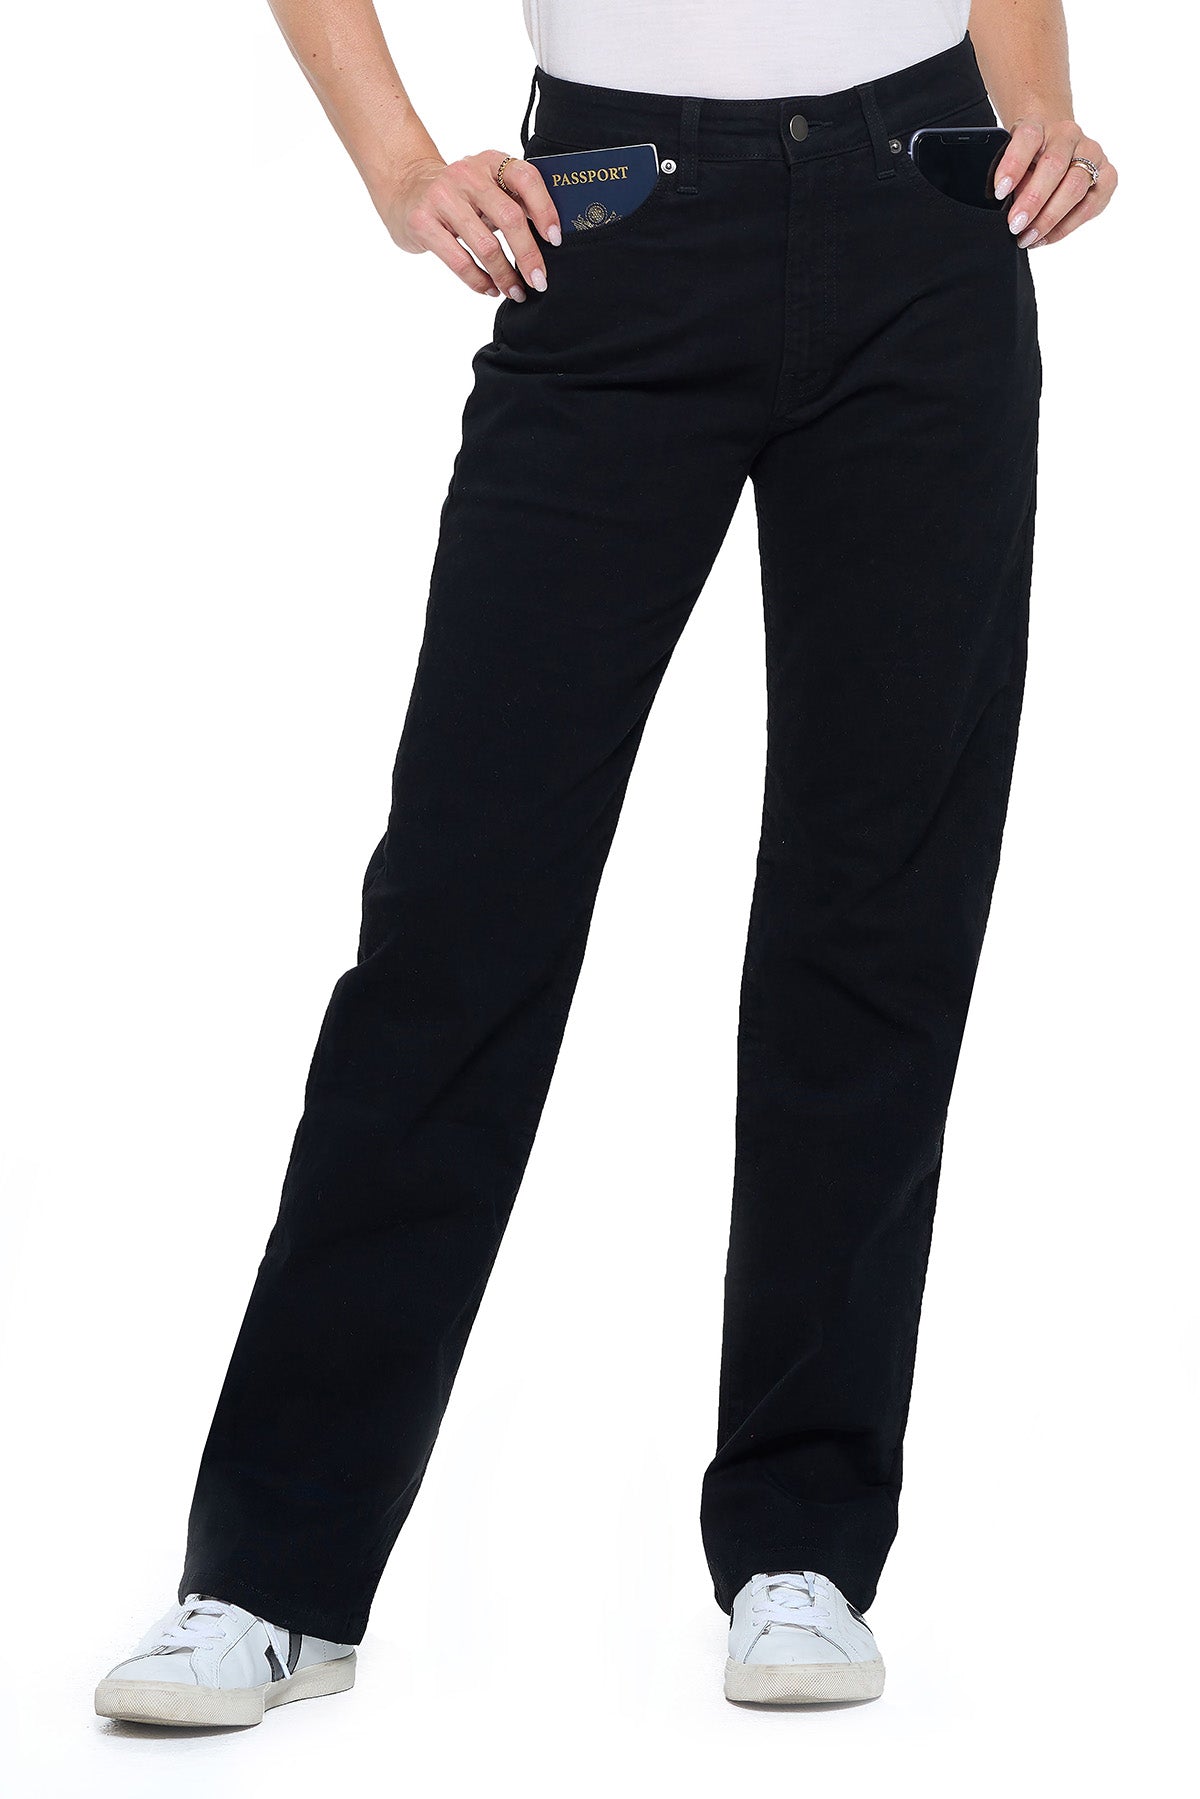 Aviator relaxed jet black travel jeans showcasing pickpocket proof capabilities